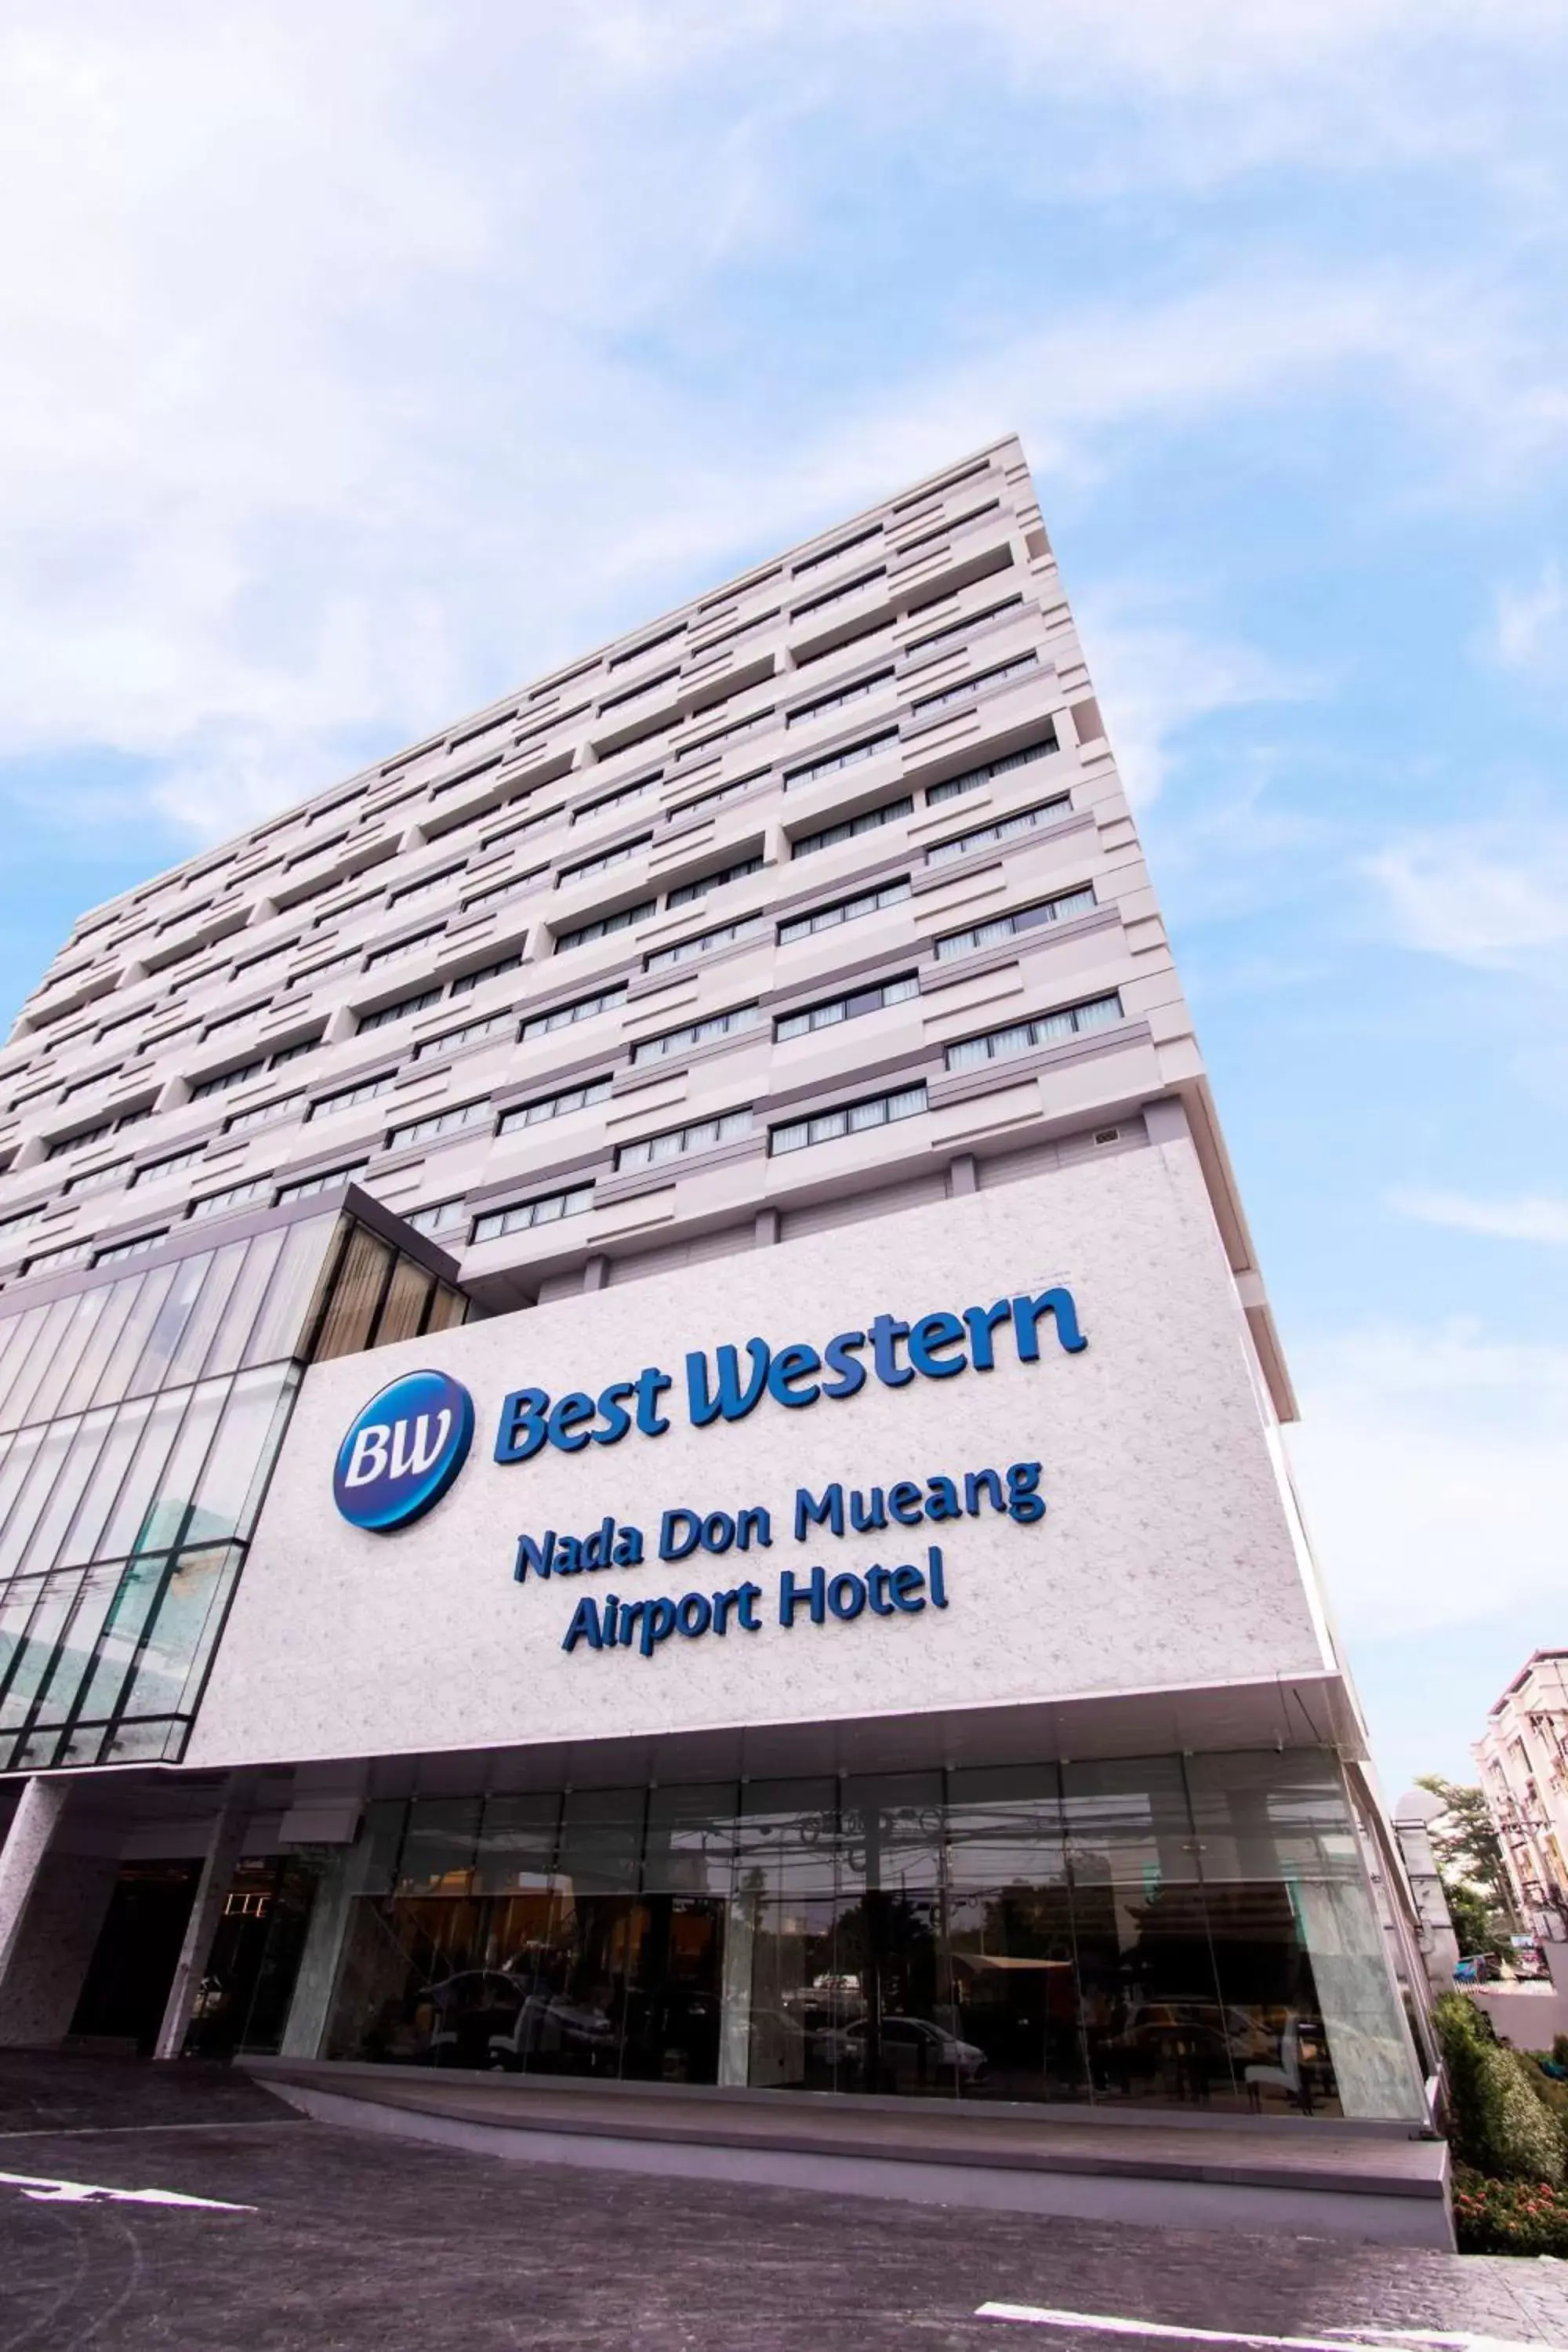 Property Building in Best Western Nada Don Mueang Airport hotel